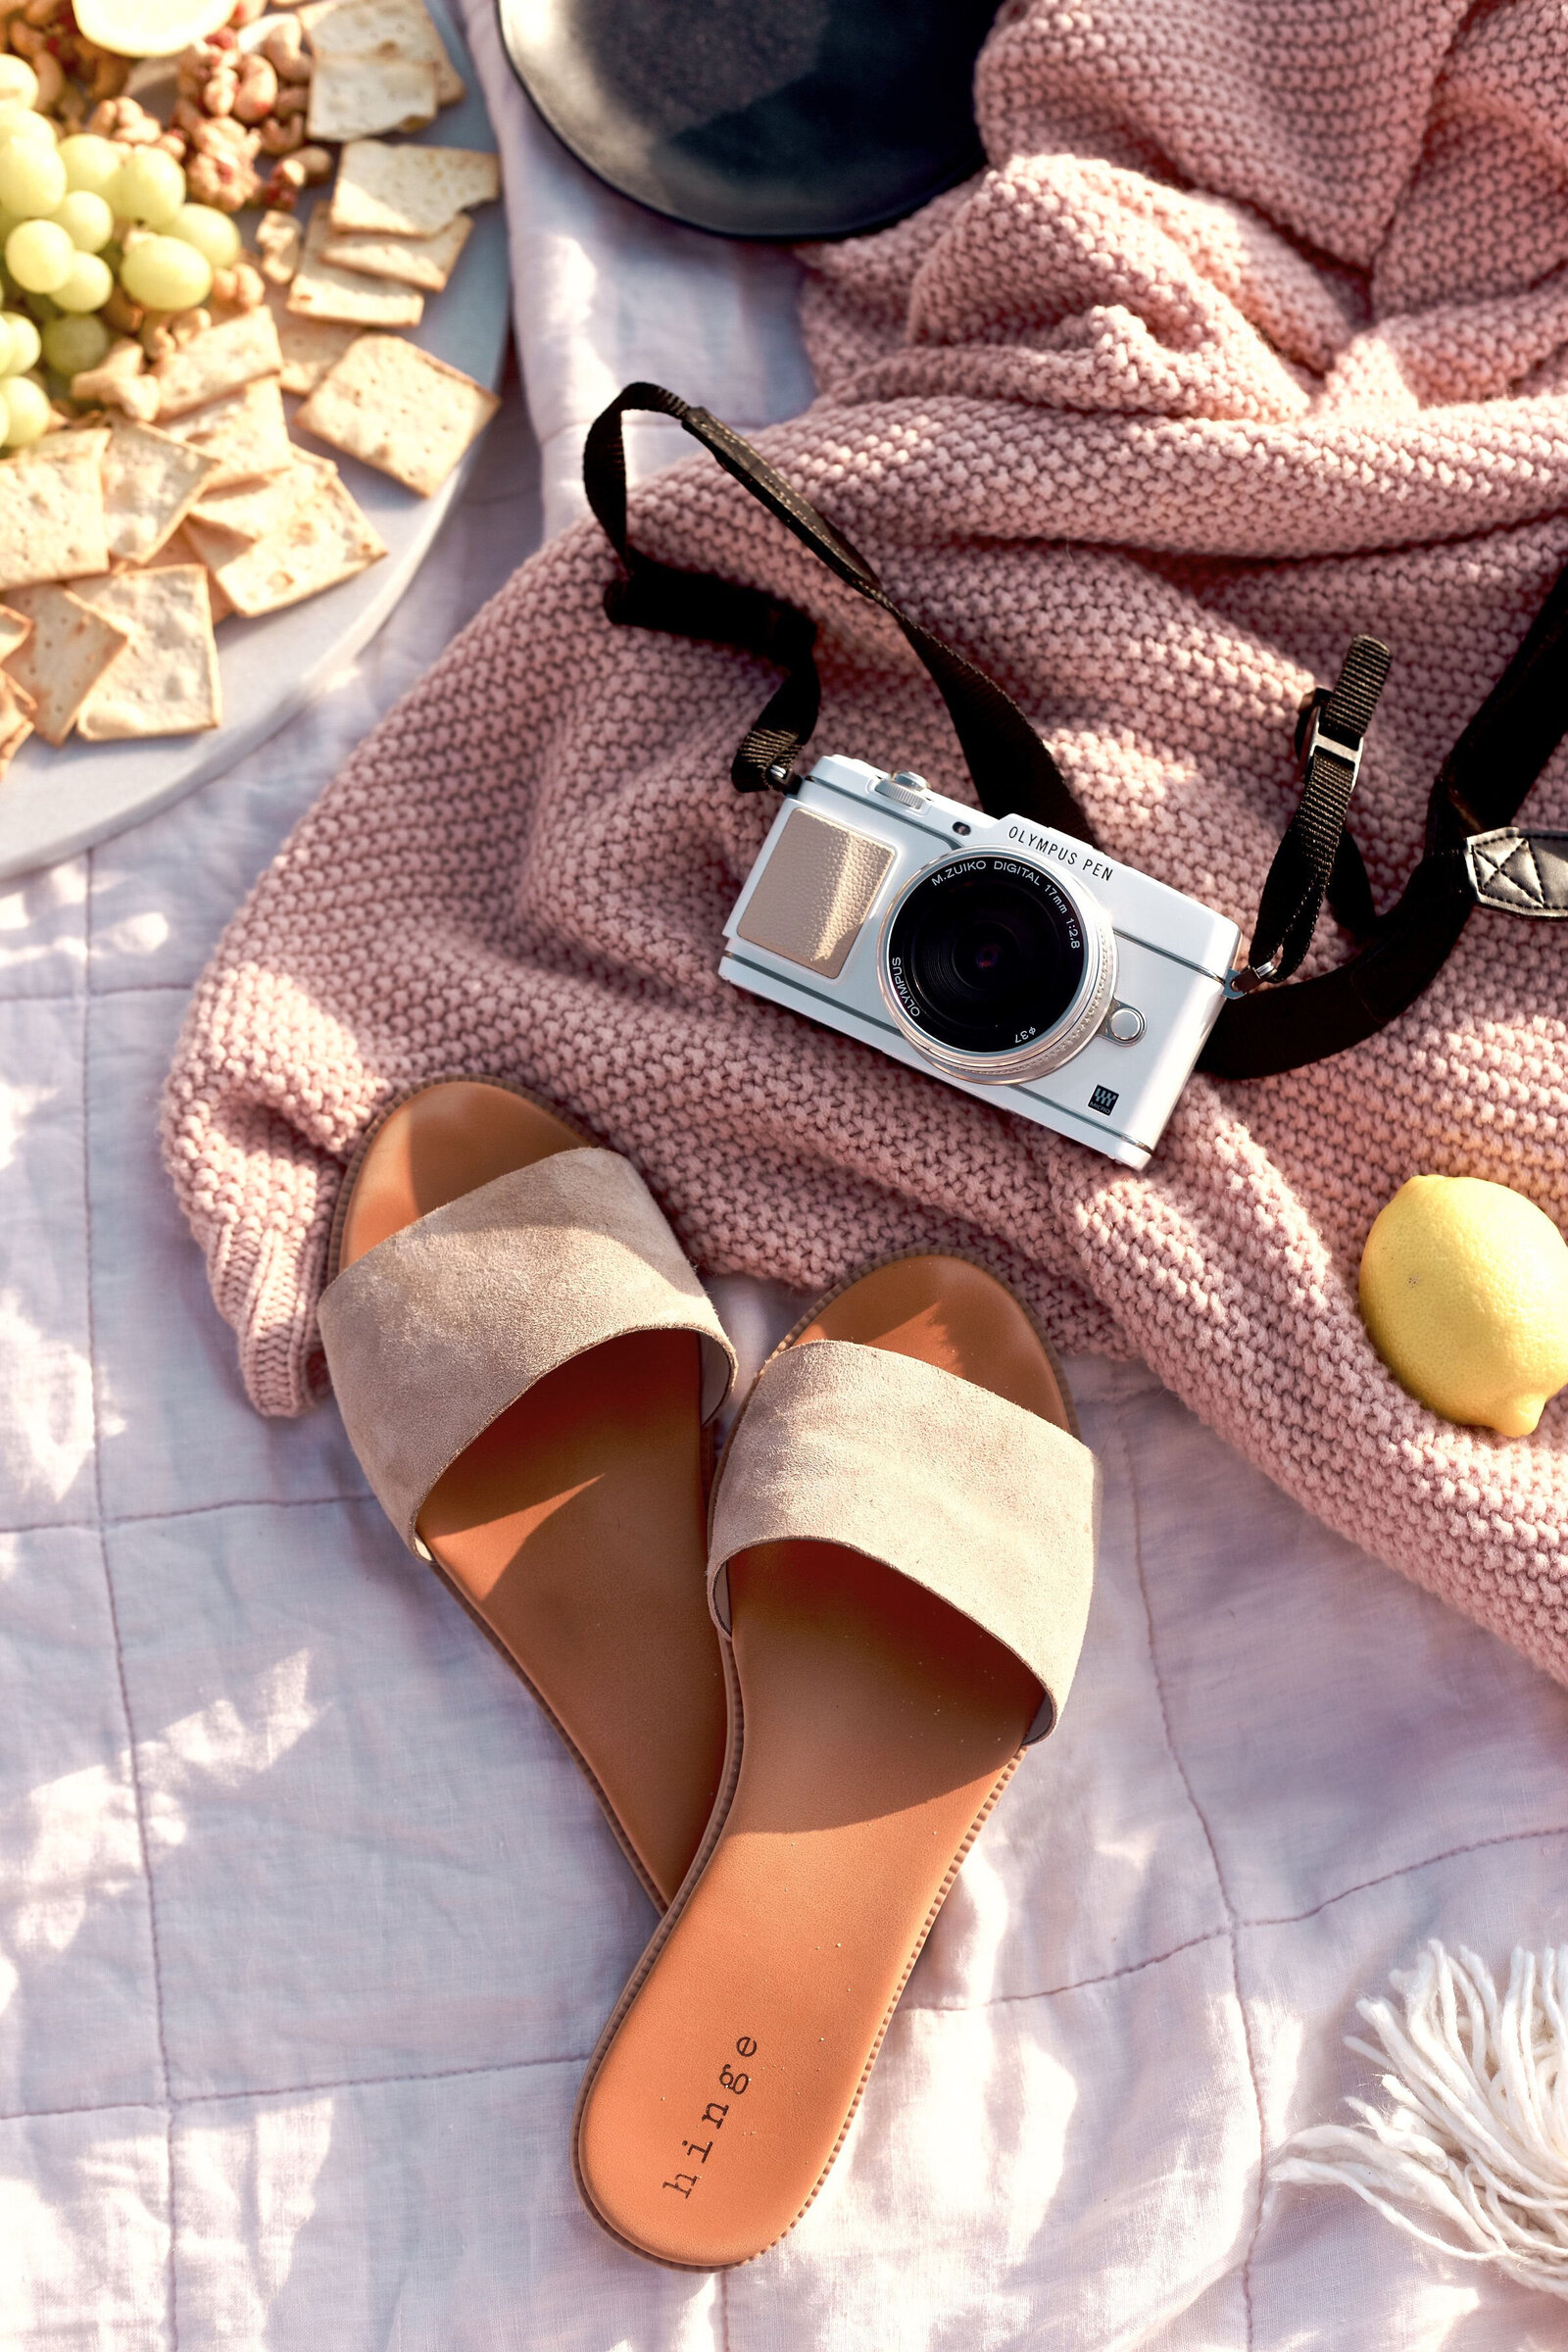 Flat Lay Branding Photographer Southern California Chelsea Loren picnic at the beach with pizza and vintage camera, lifestyle